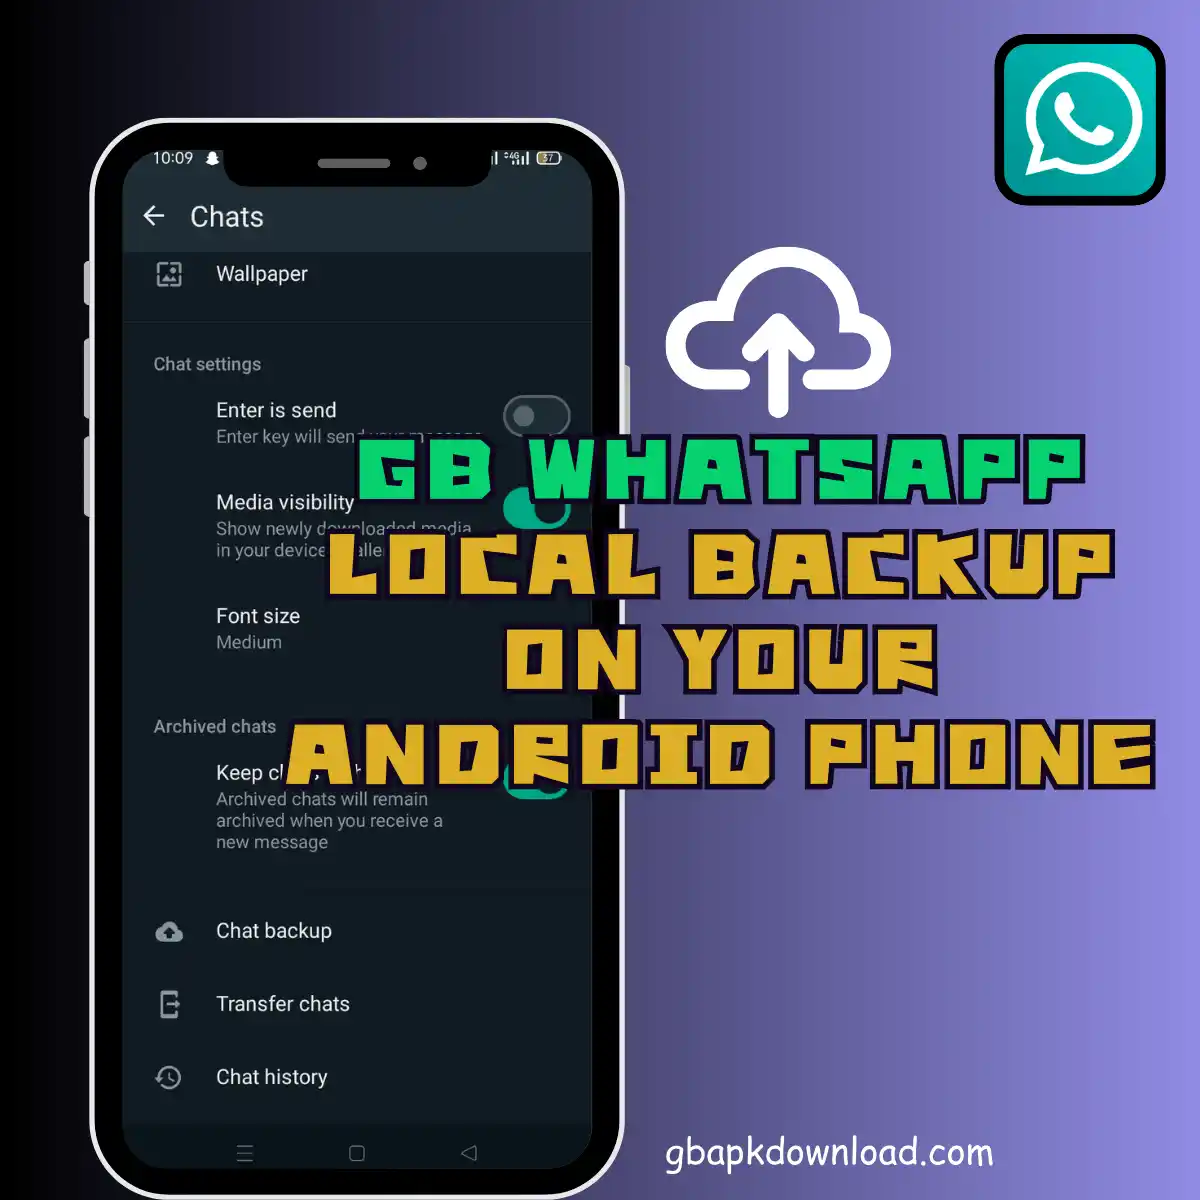 GB WhatsApp Local Backup on your Android phone